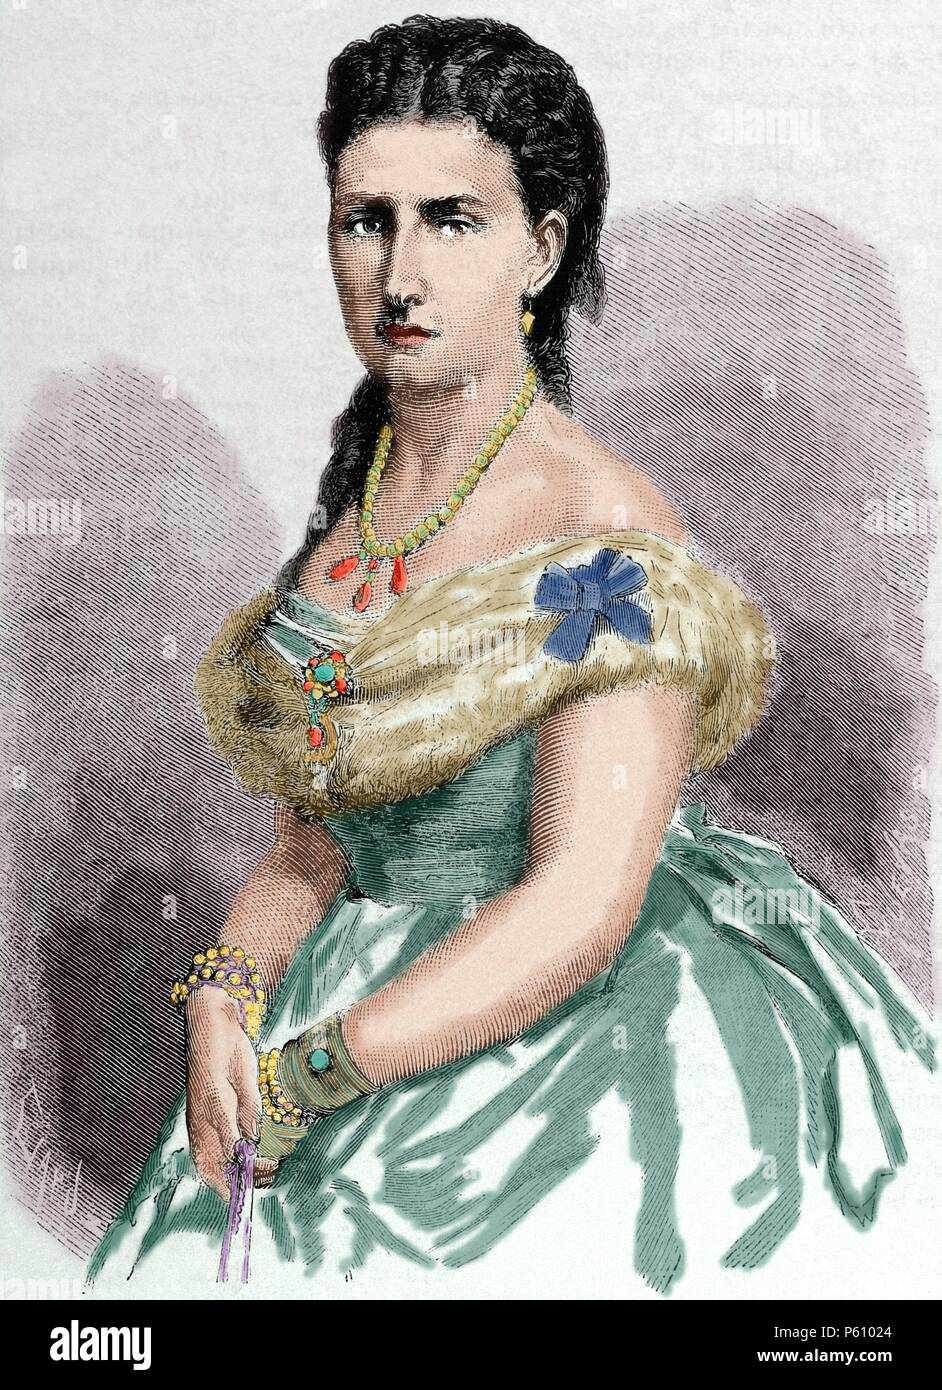 Infanta Antonia of Portugal or of Braganza. (1845 âA i 1913). Was a Portuguese infanta (princess) of the House of Braganza-Saxe-Coburg and Gotha, daughter of Queen Maria II of Portugal and her King consort Ferdinand II of Portugal. She married Leopold, Prince of Hohenzollern-Sigmaringen. Engraving by Tomas Carlos Capus.The Spanish and American illustration, 1870. Colored. Stock Photo